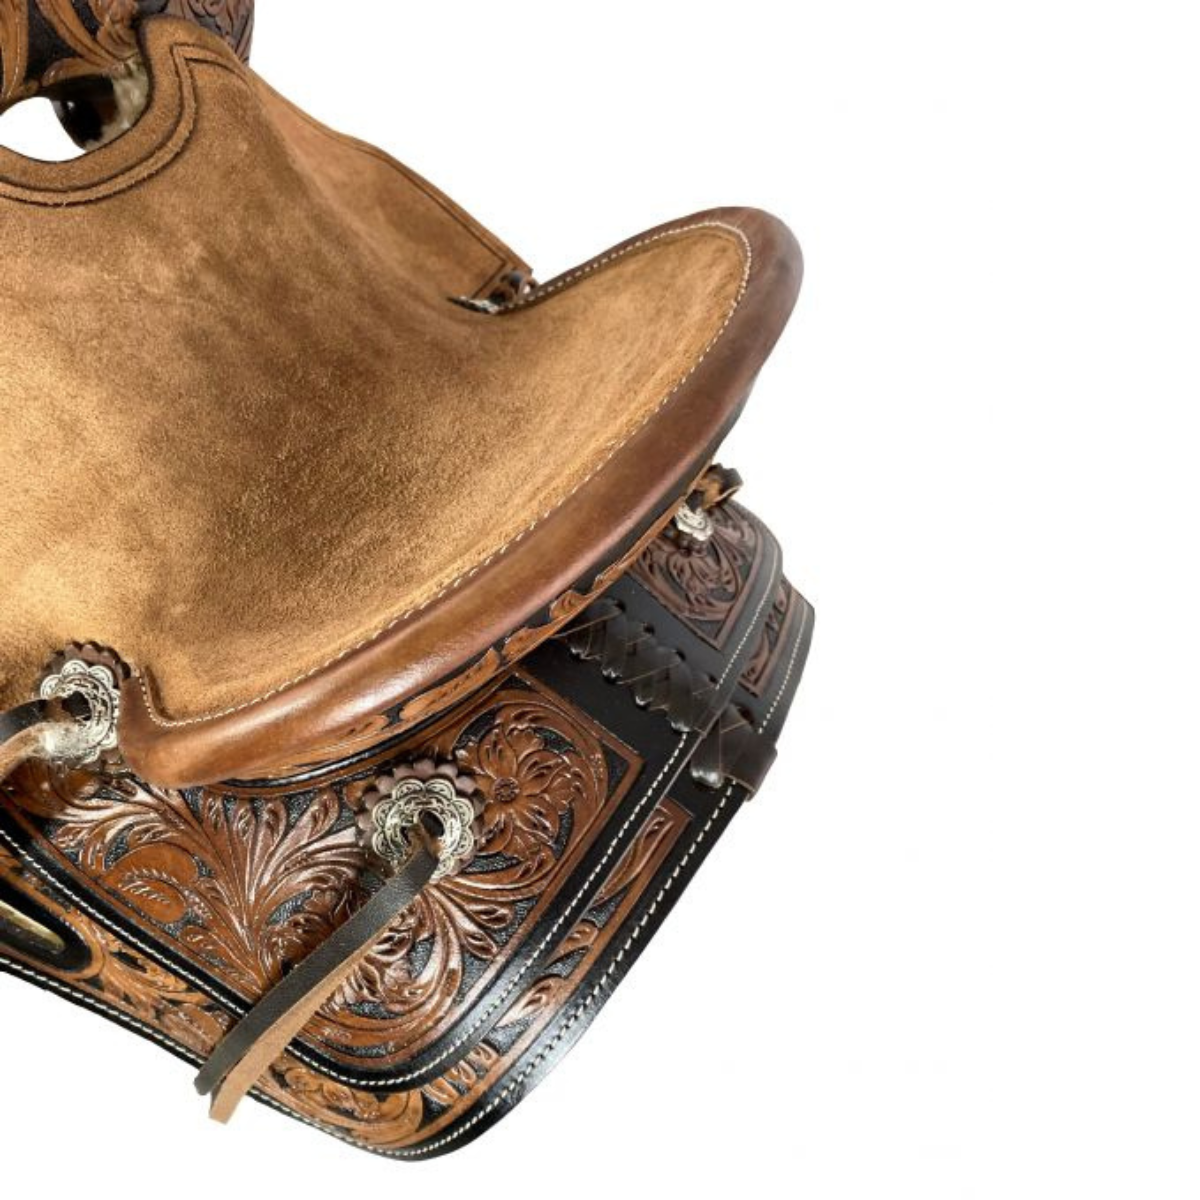 10" Double T  Youth ranch style saddle with Two-Tone floral tooling - Double T Saddles